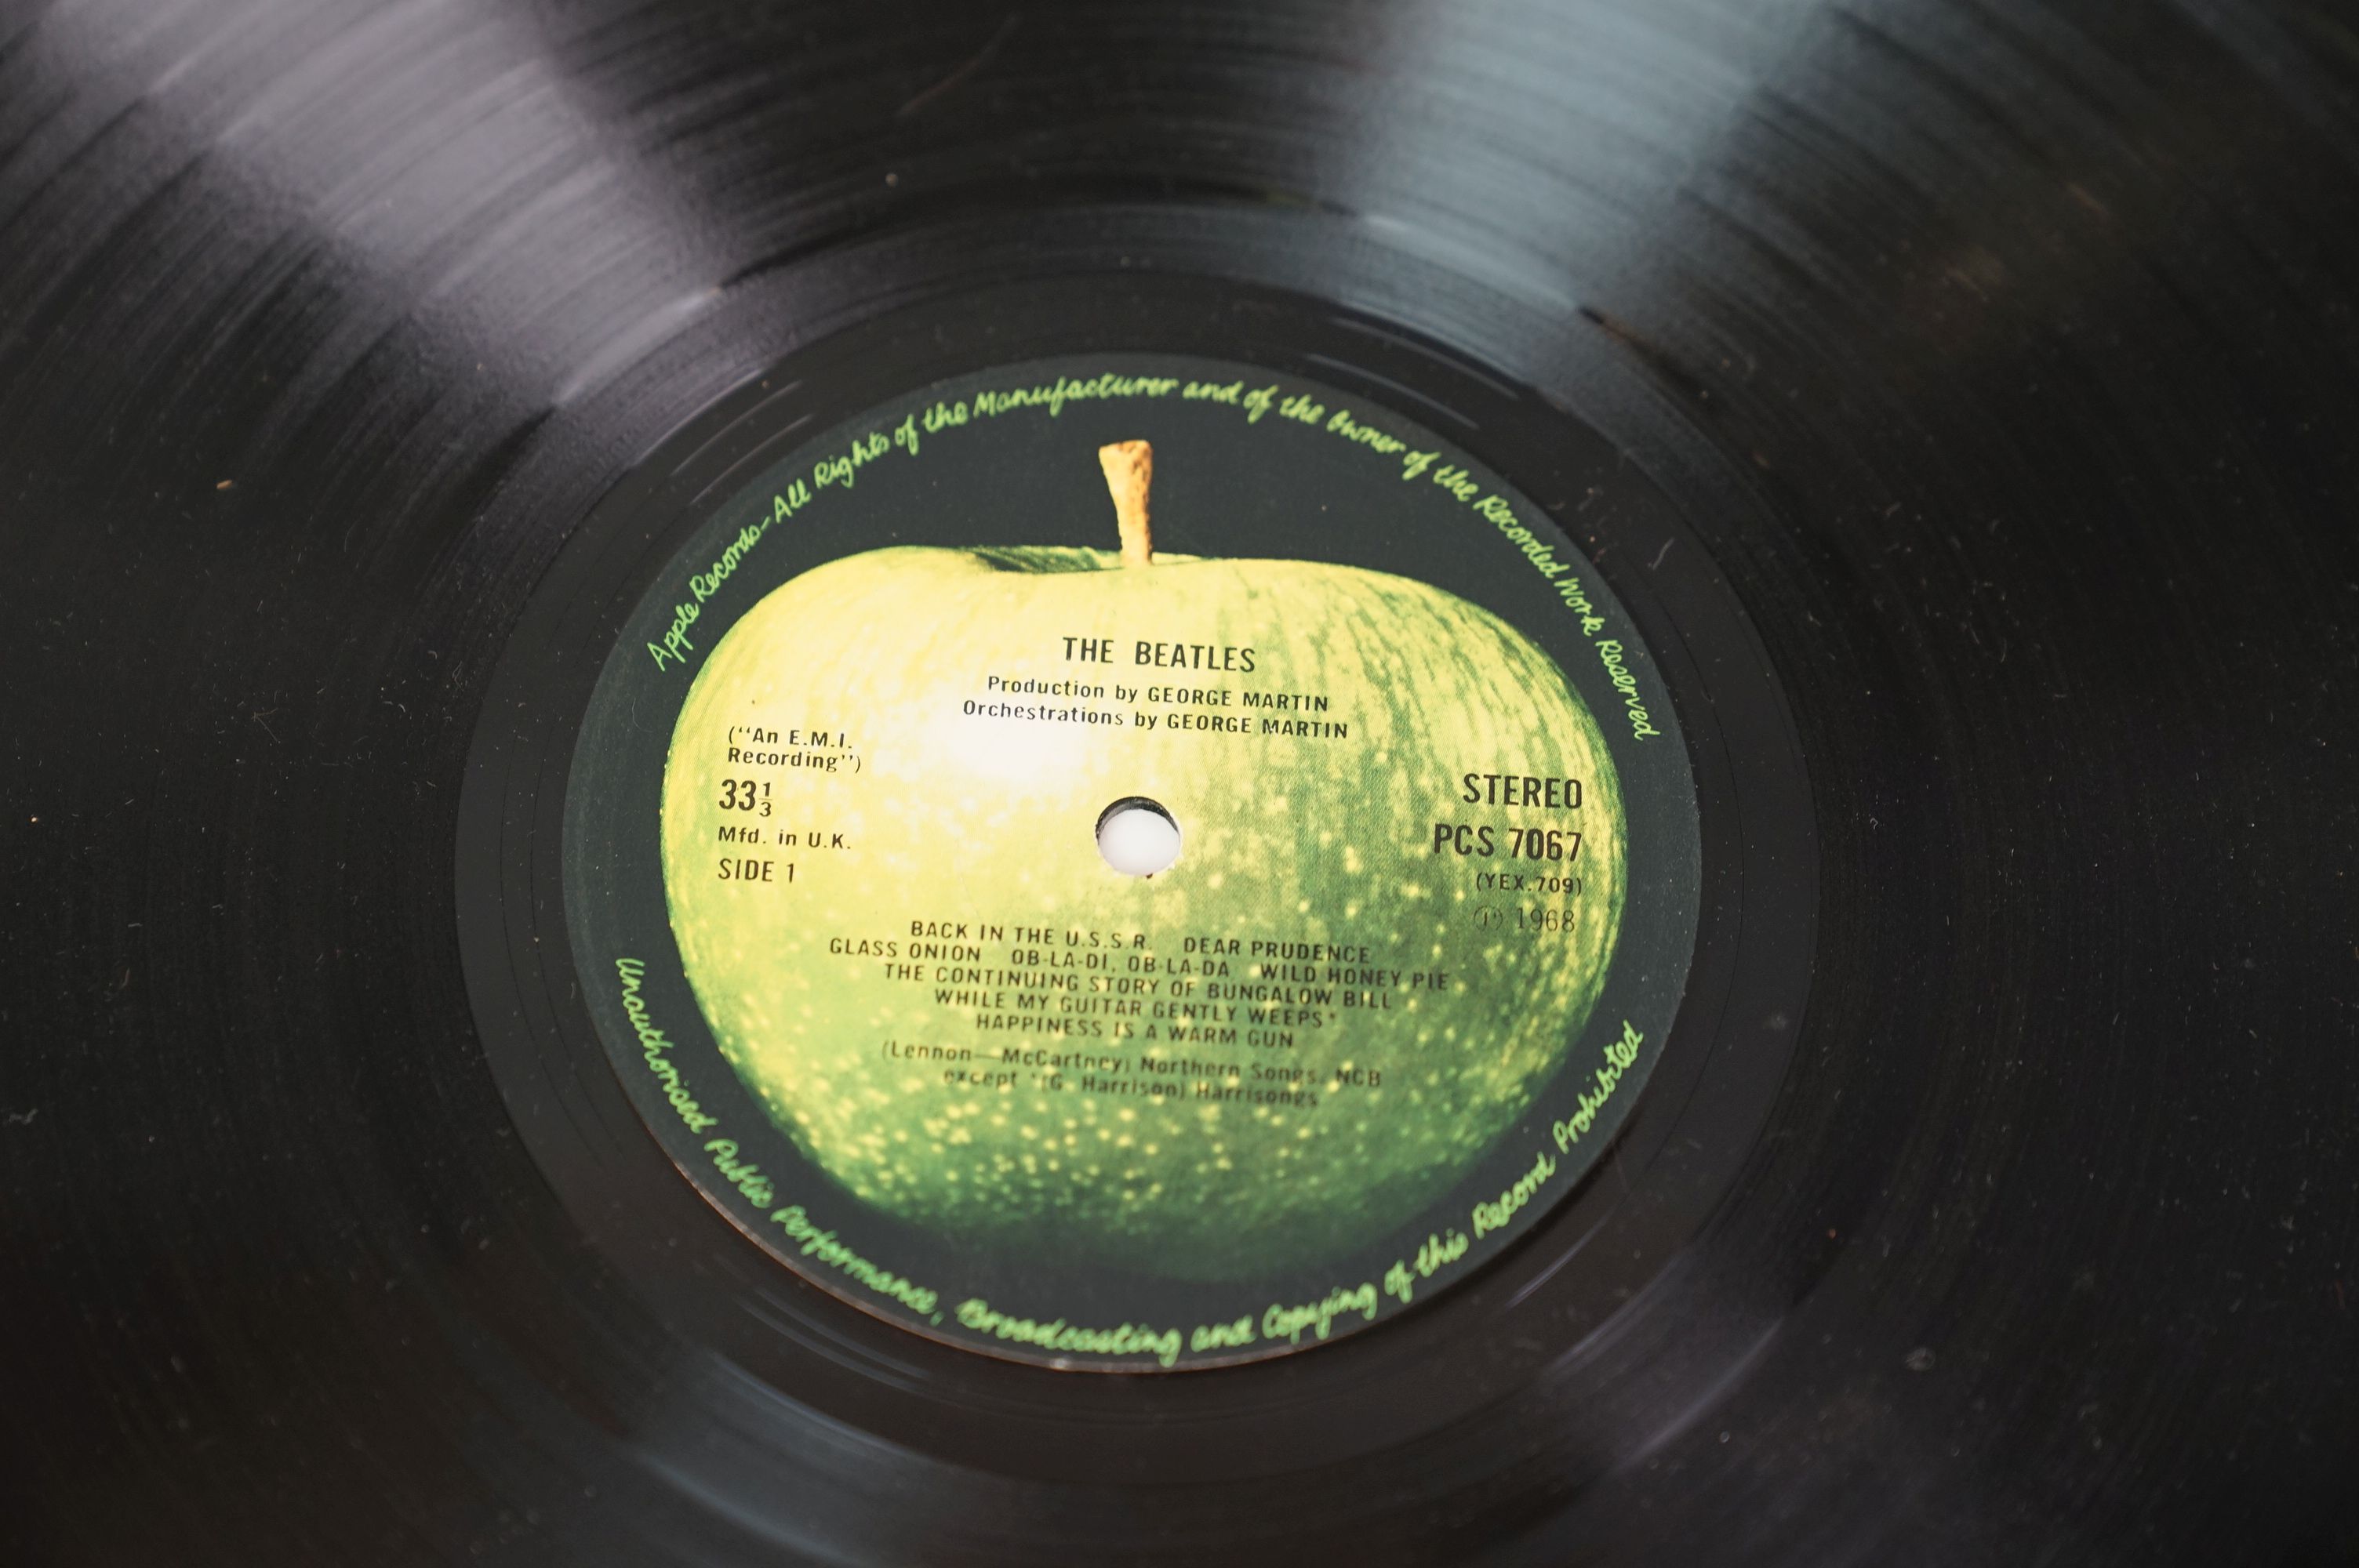 Vinyl - The Beatles White Album PCS7067/8 Stereo side opener no. 296130, 4 photographs and poster ex - Image 12 of 17